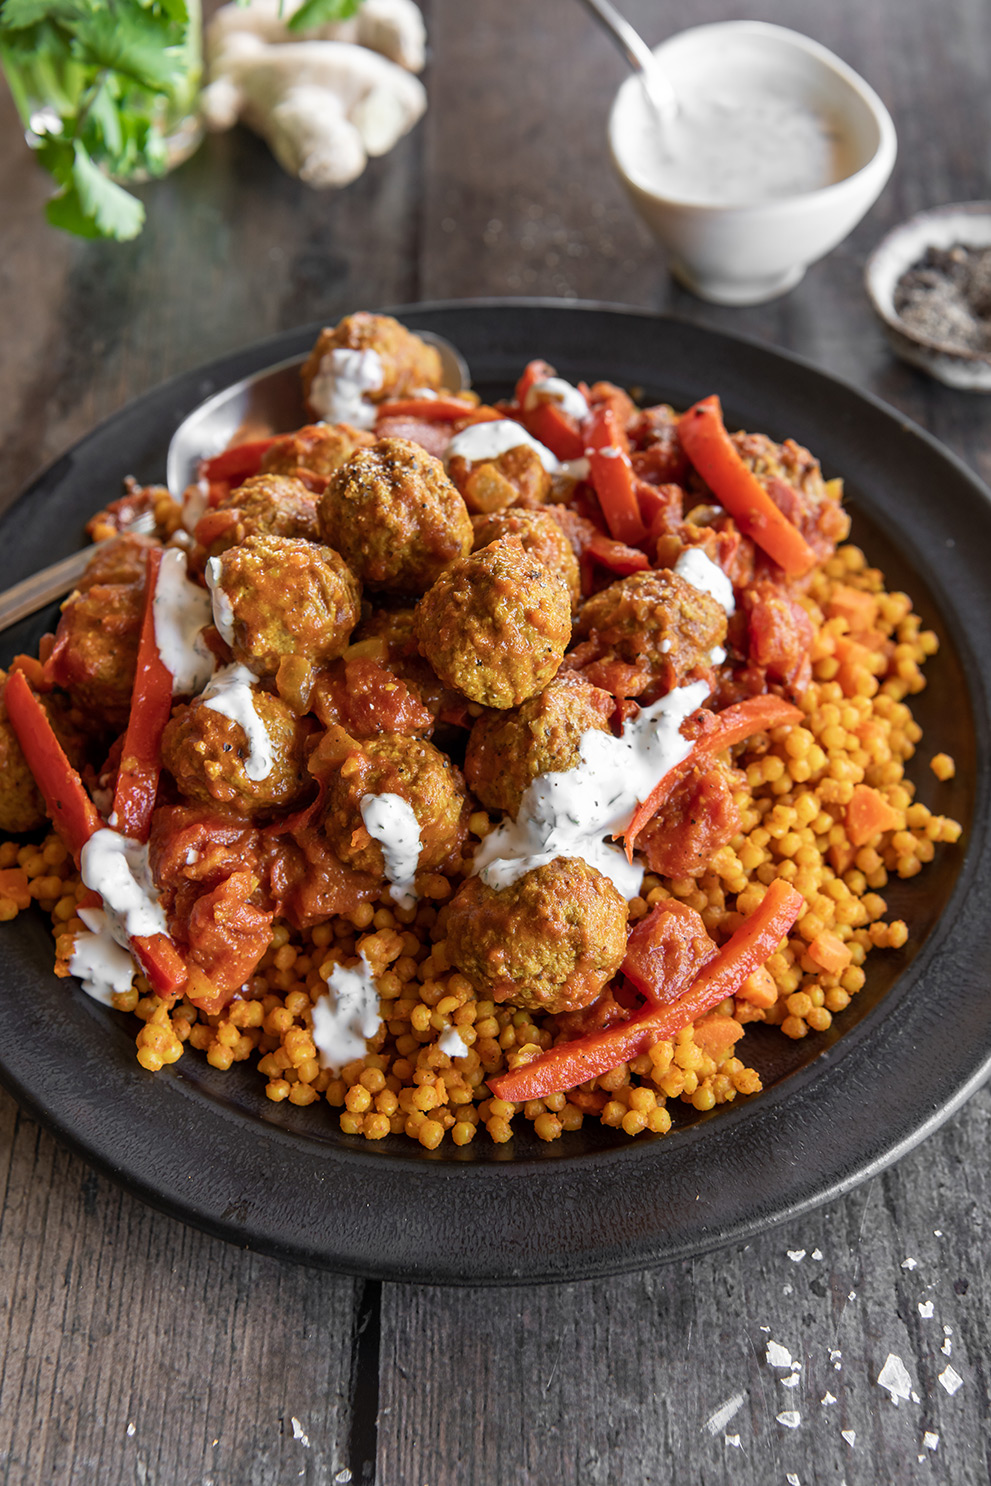 Moroccan-spiced Meatballs with Couscous - Armanino